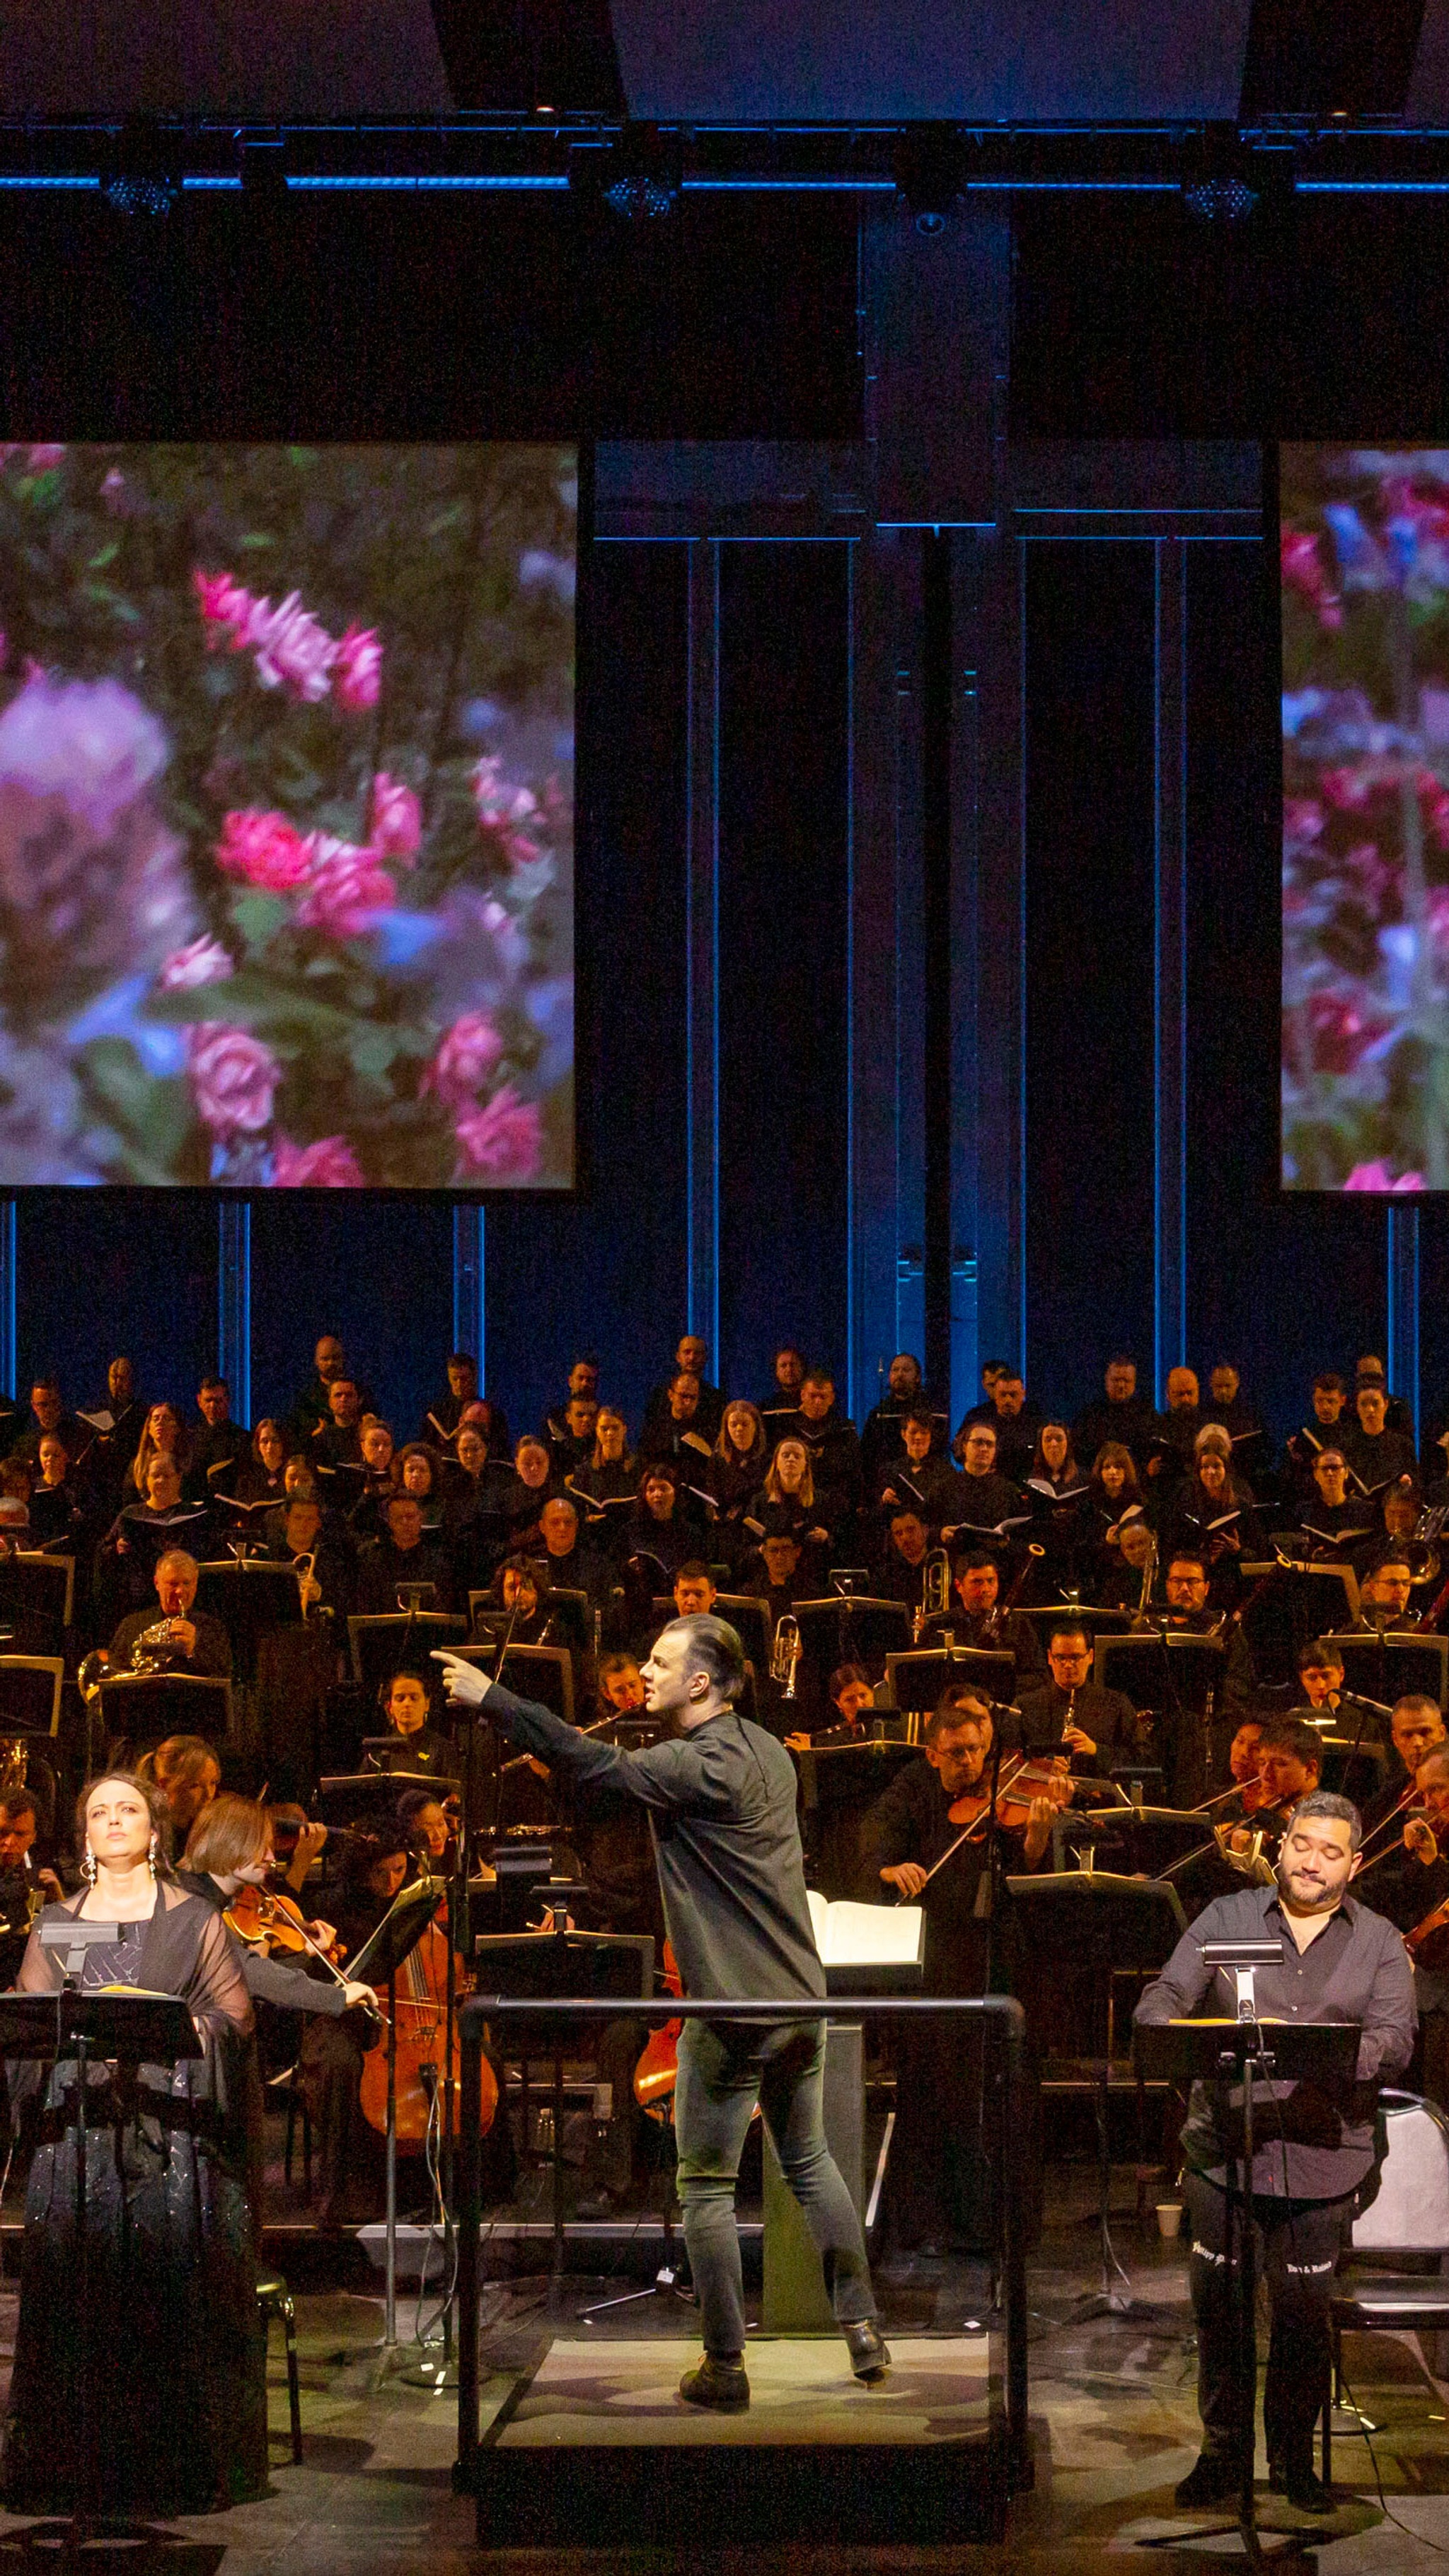 Teodor Currentzis conducting an orchestra in front of two large screens.